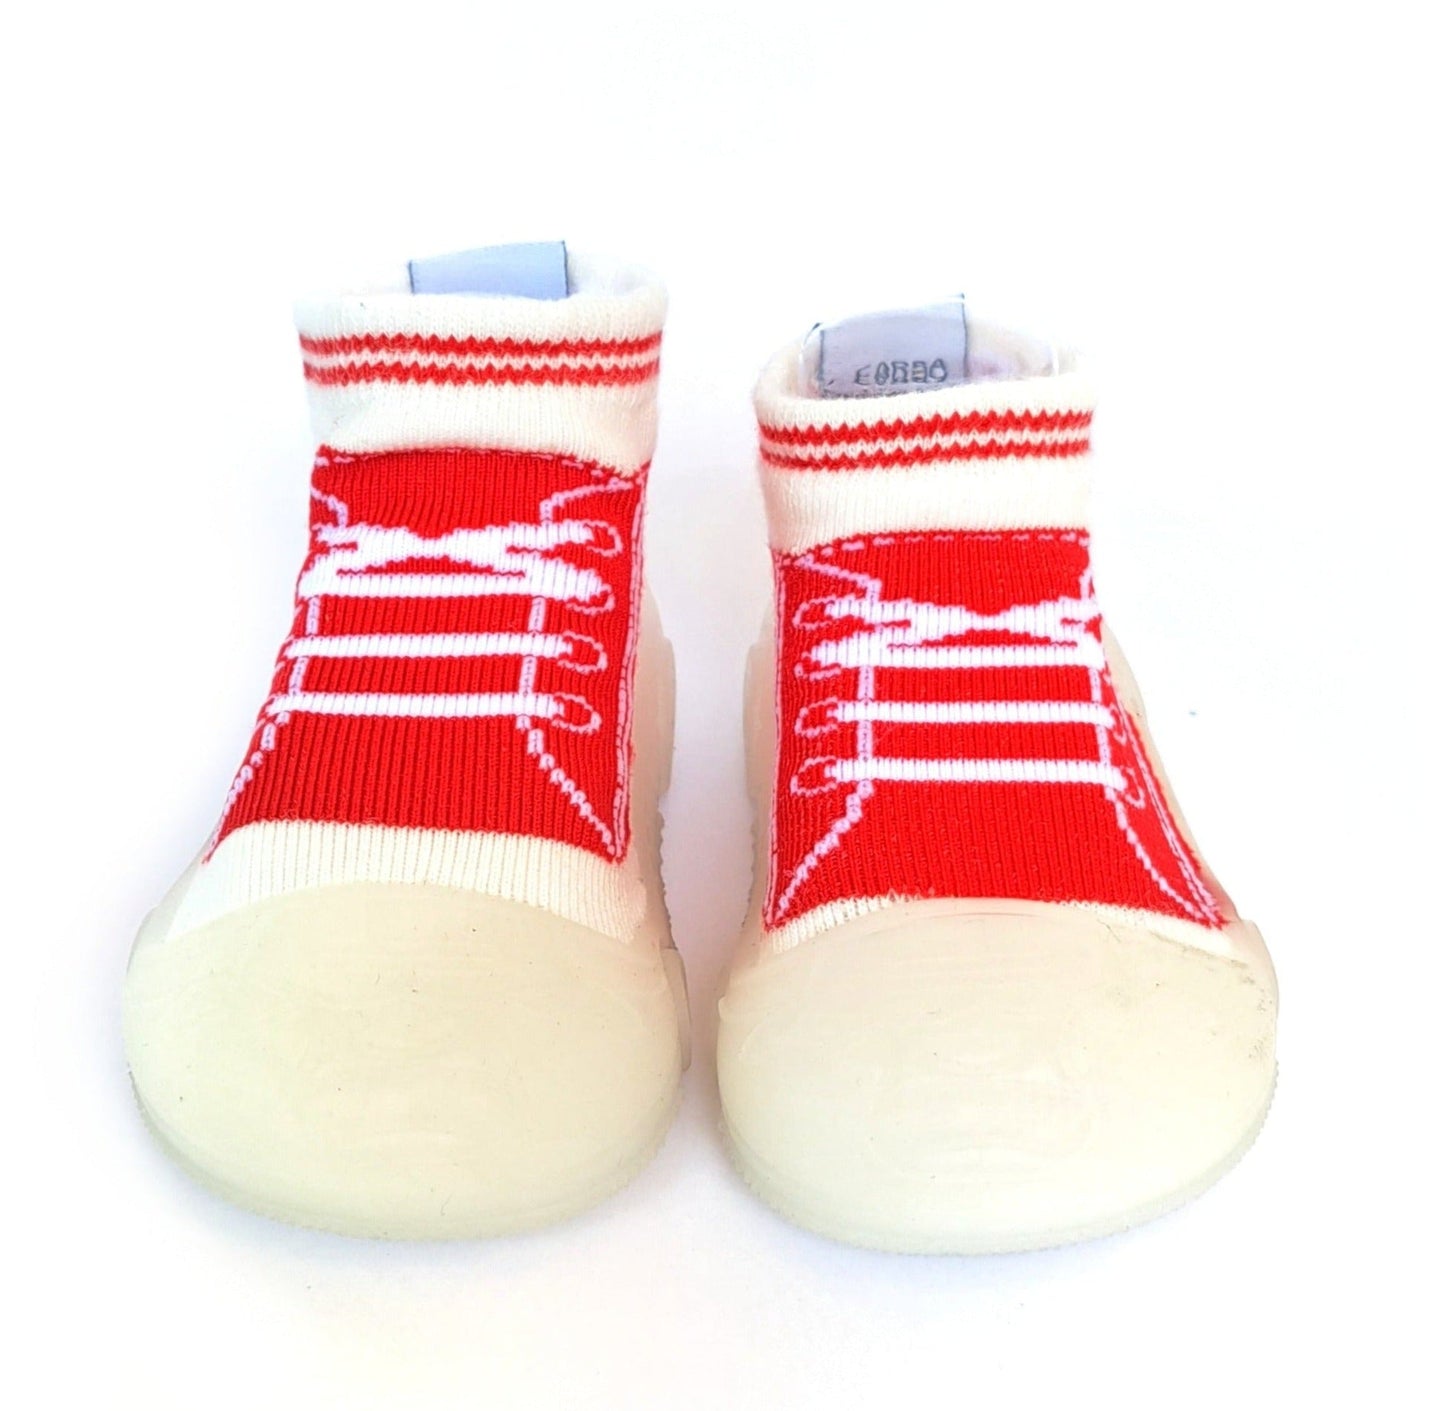 Fast Back by Bearba-Sock Shoes for First Time Walkers- Sizes XS,S,M-Non slip soles- Machine washable- Colours Blue/Red - Bearba